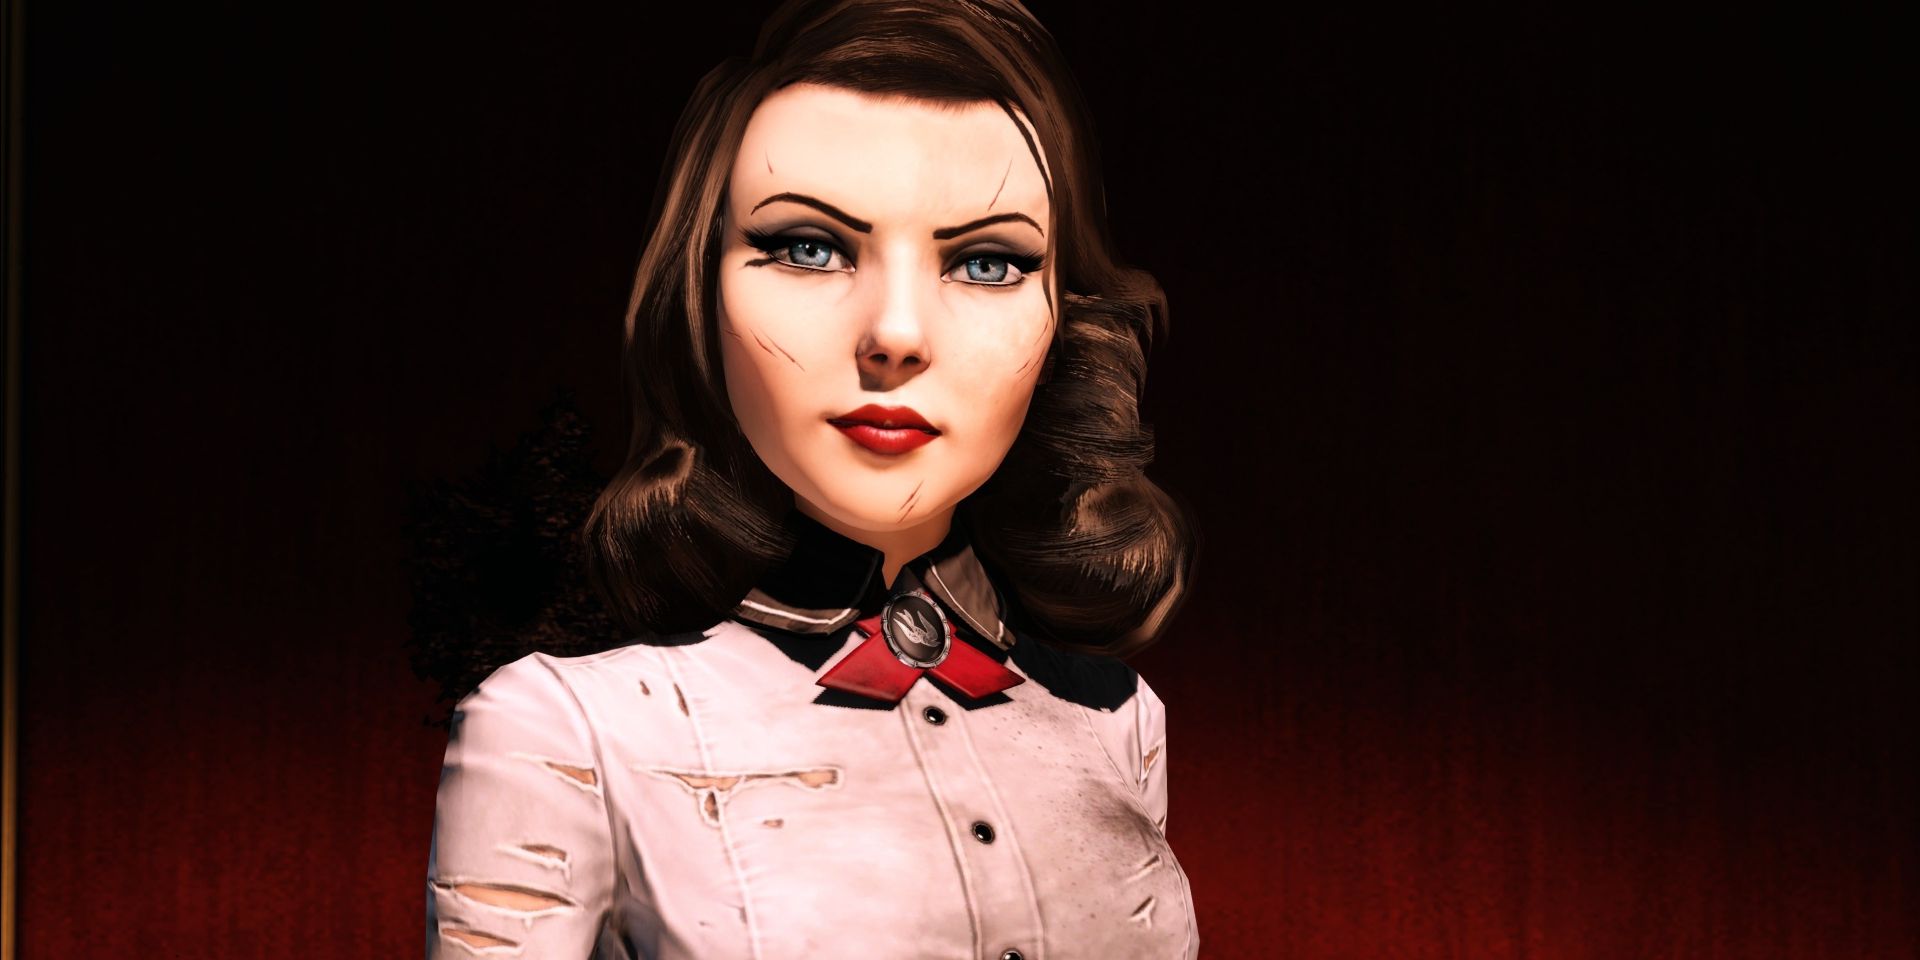 A close up of the character of Elizabeth from Bioshock Infinite's Burial At Sea DLC.